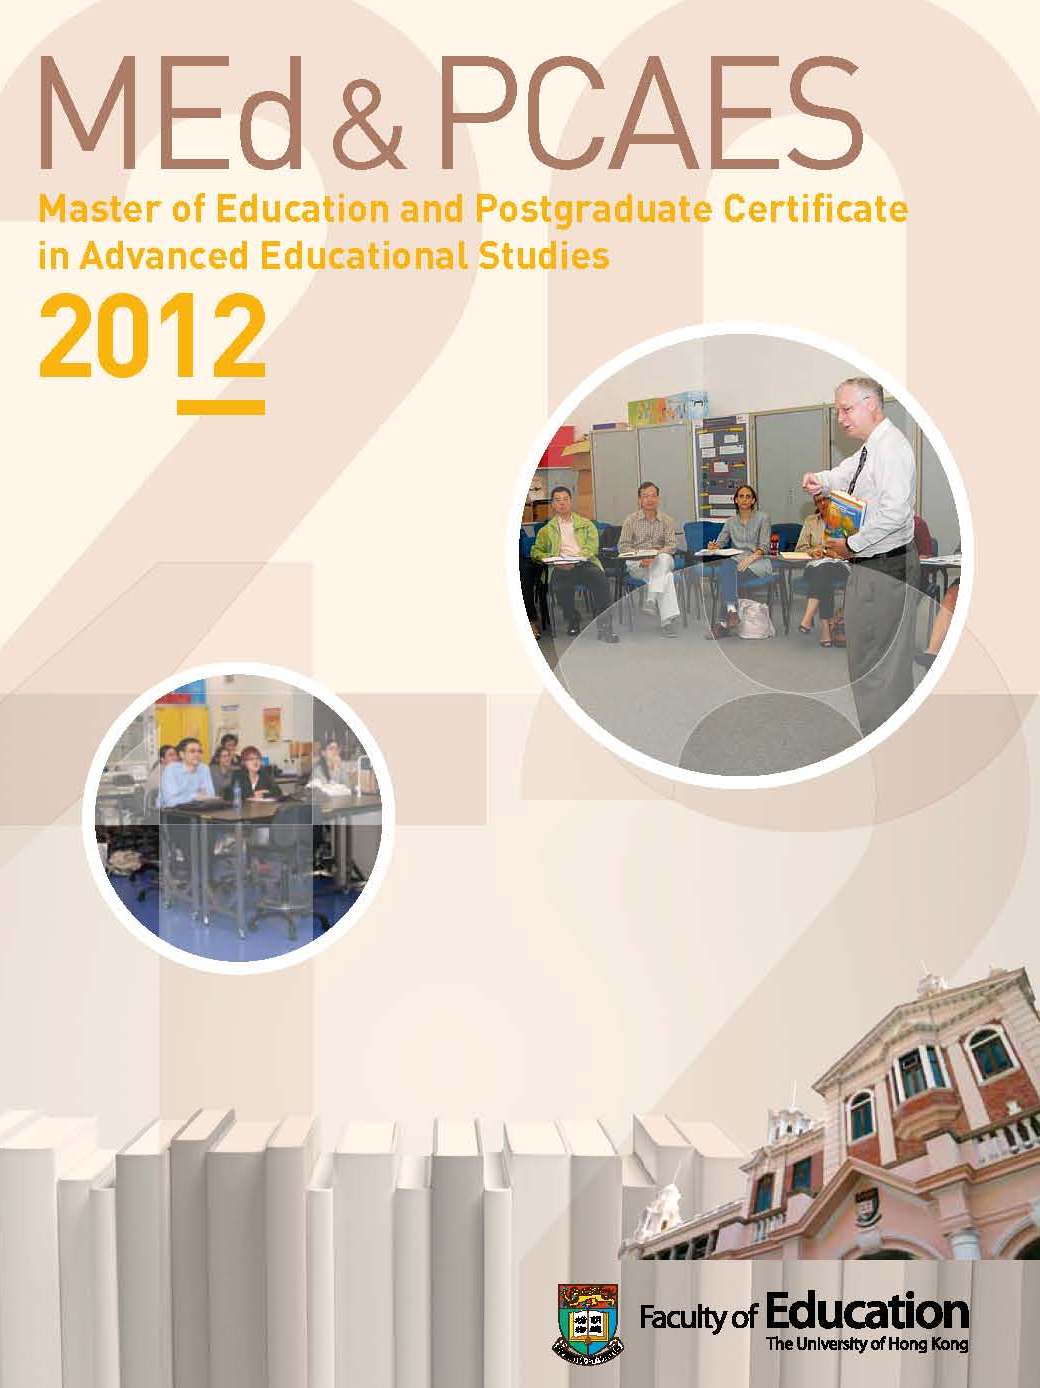 Information Session for Master of Education (MEd) and Postgraduate Certificate in Advanced Educational Studies (PCAES) 